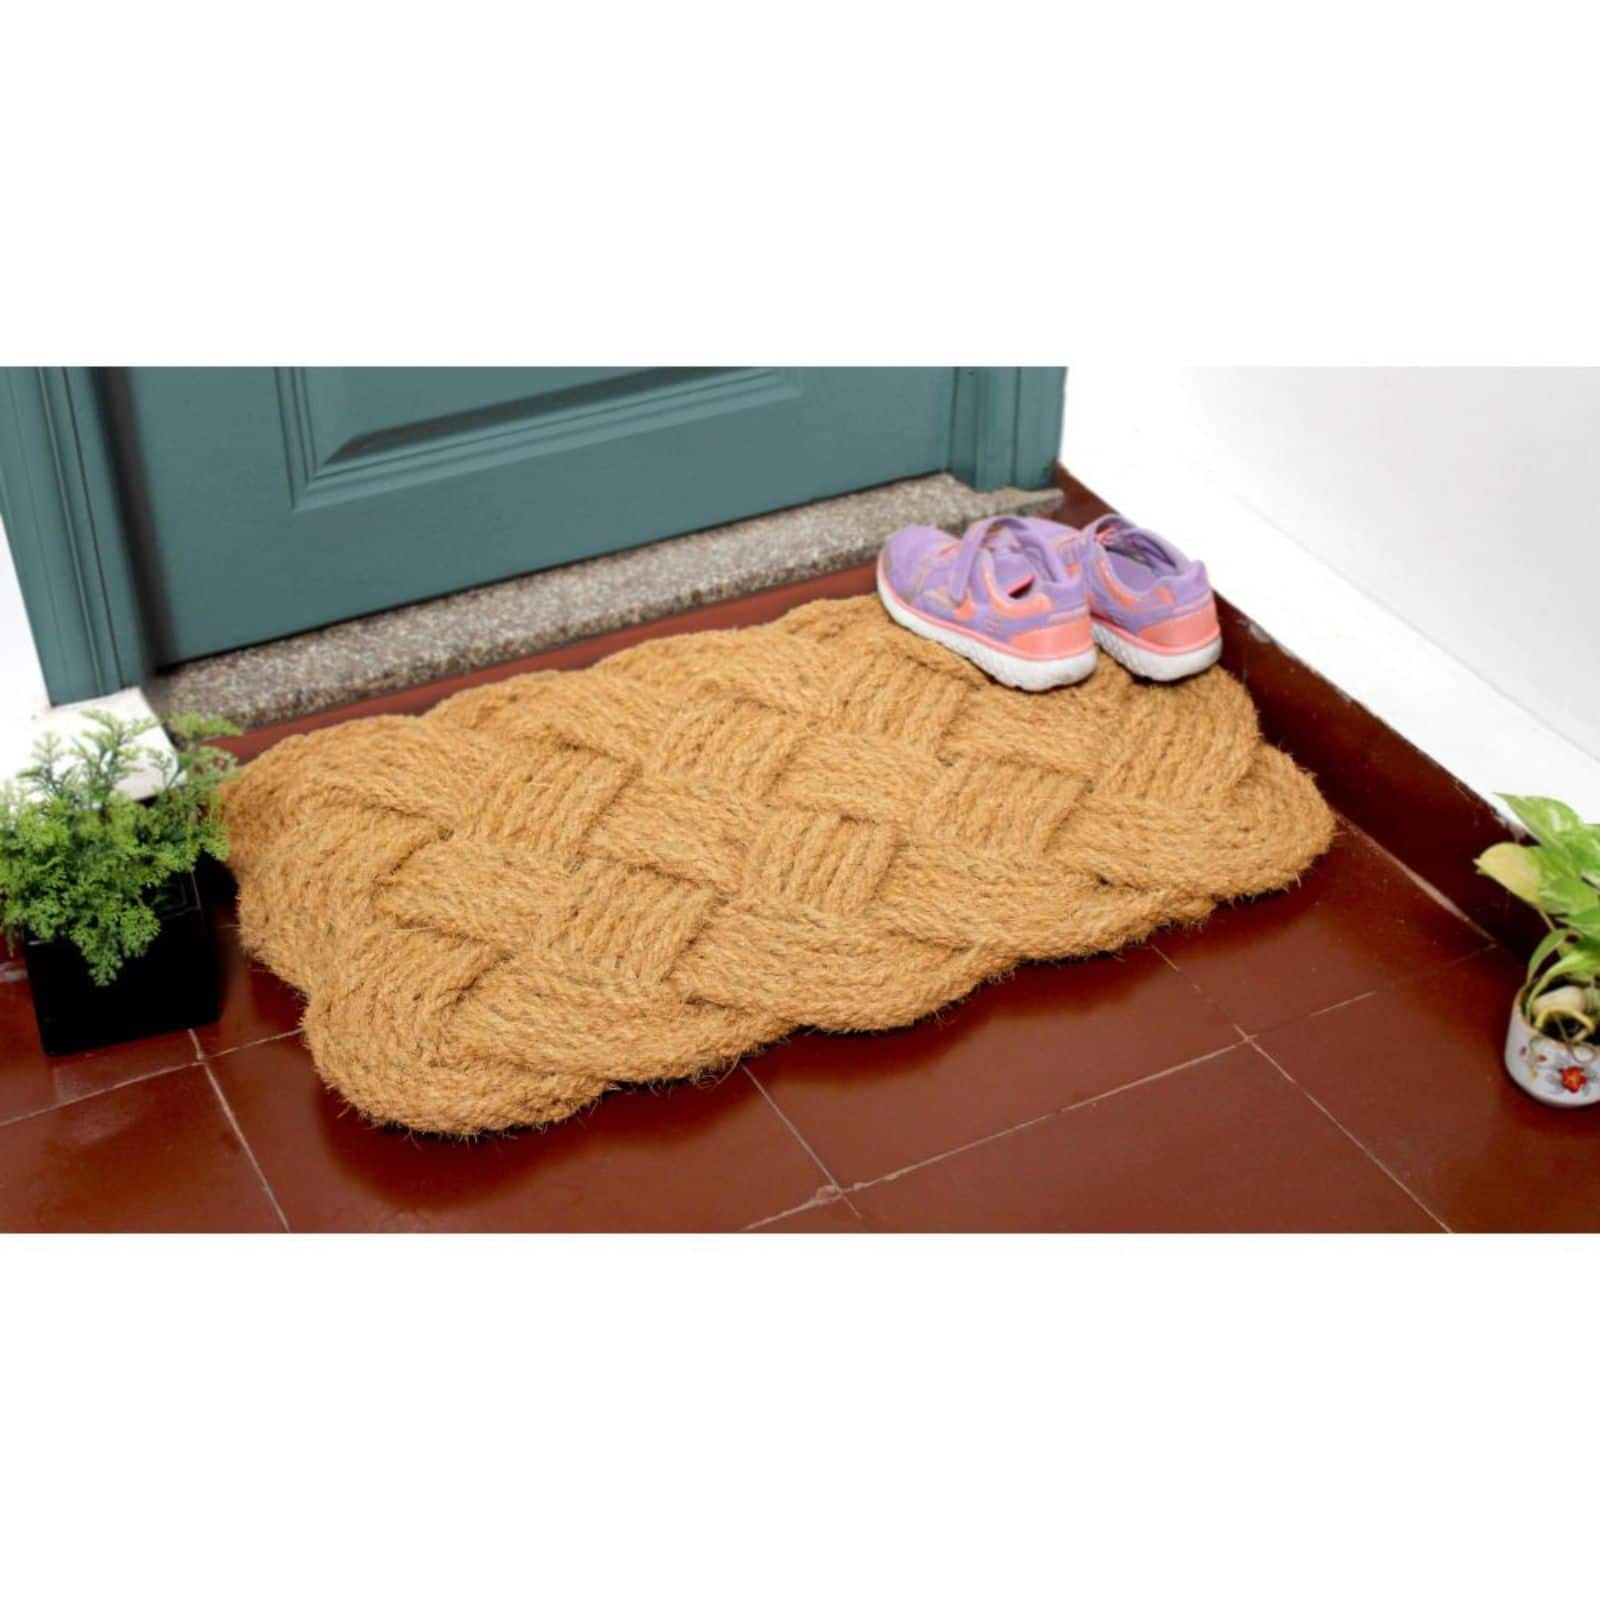 RugSmith Natural Handcrafted Handknotted Coir Doormat